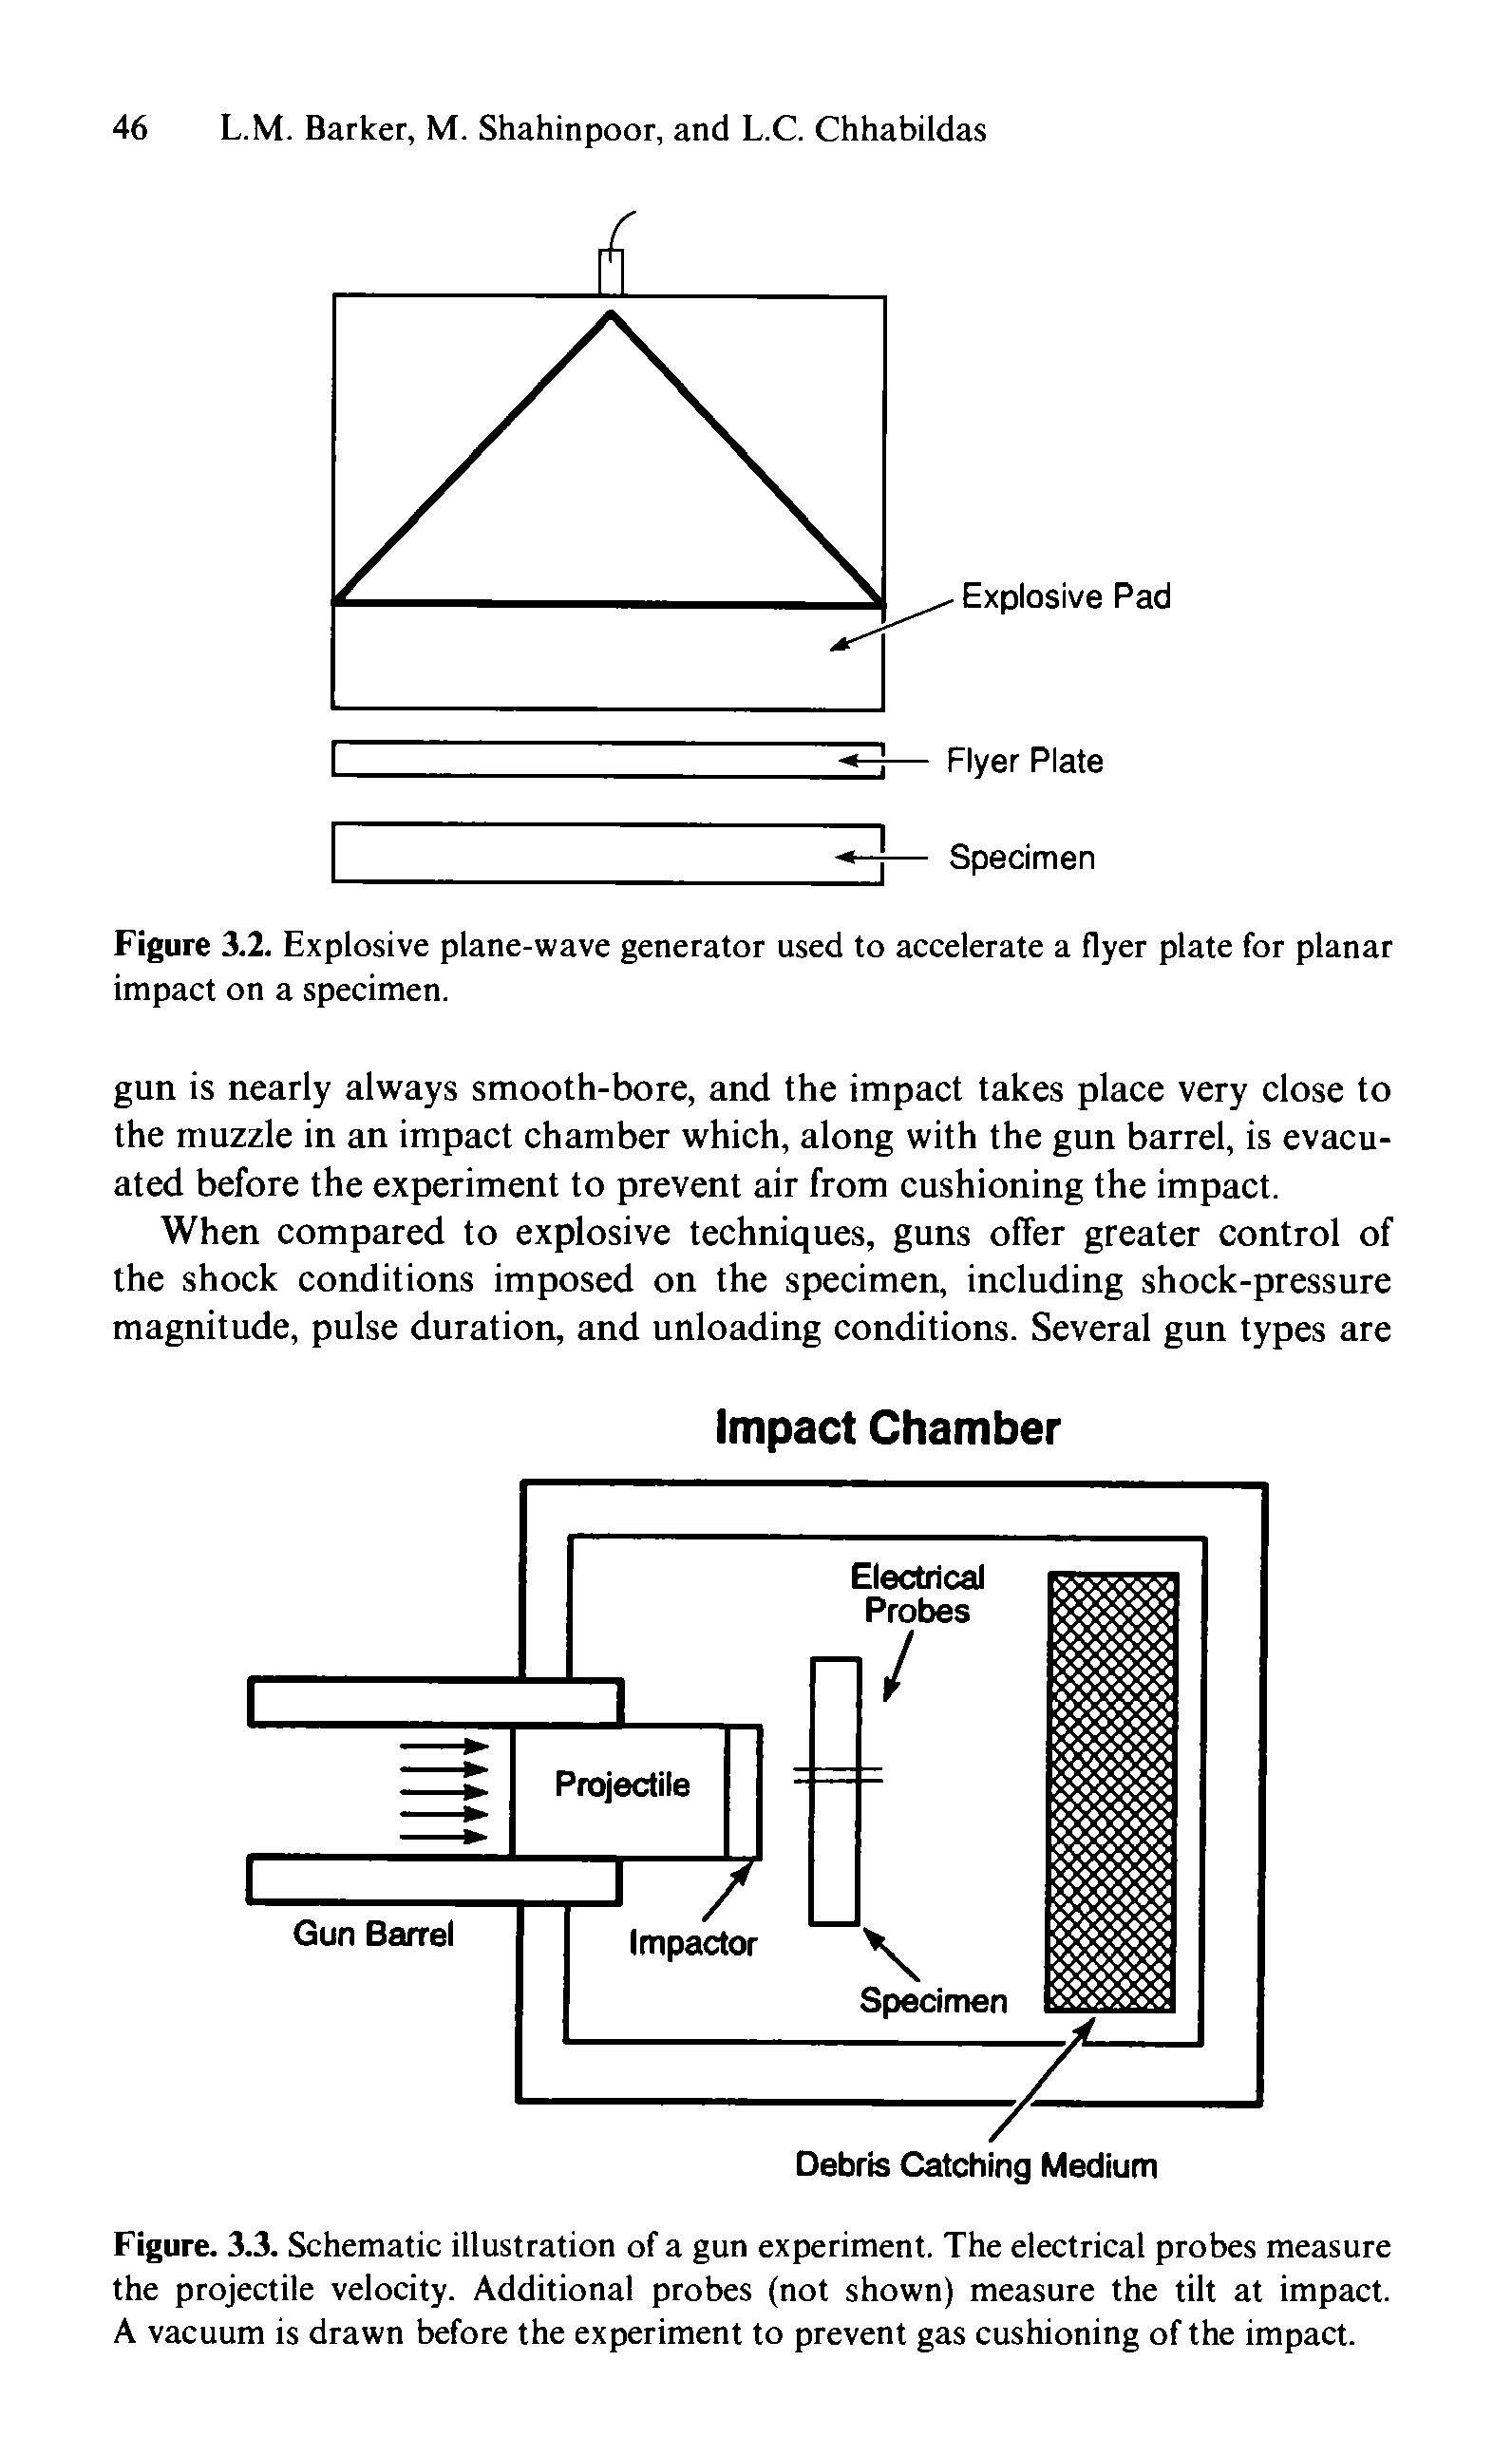 Figure 3.2. Explosive plane-wave generator used to accelerate a flyer plate for planar impact on a specimen.